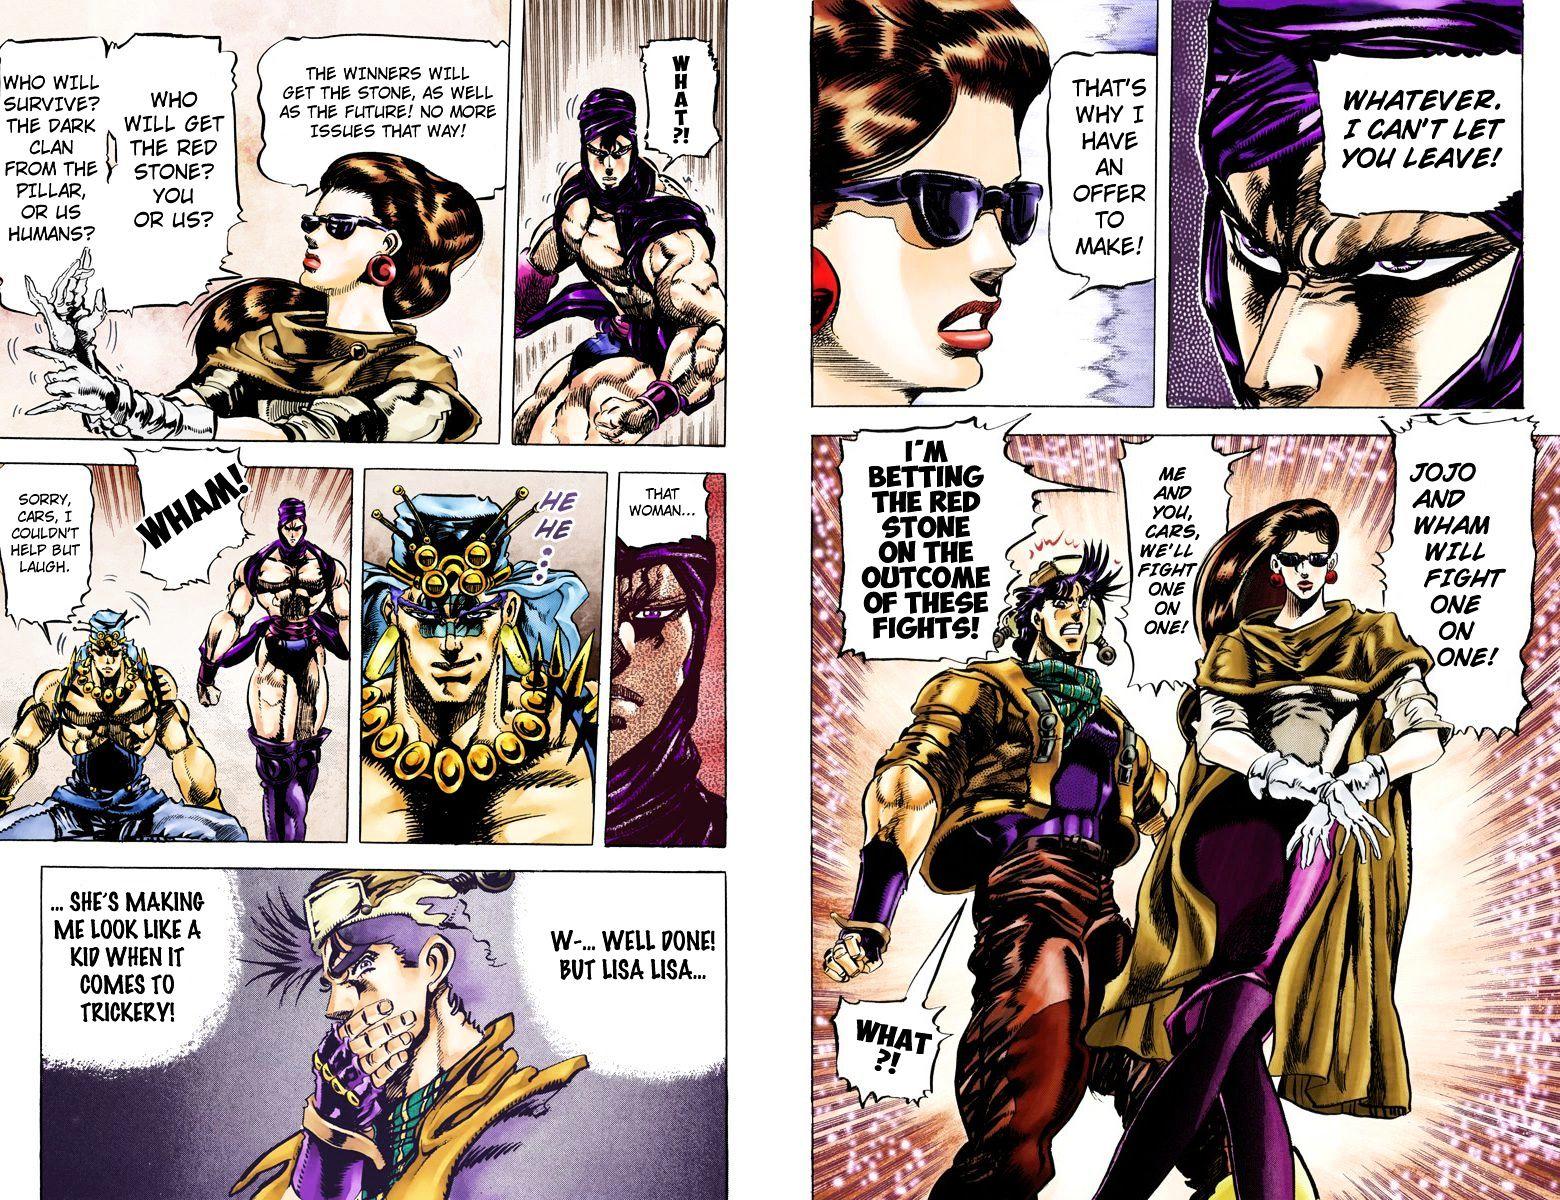 Jojo's Bizarre Adventure Vol.10 Chapter 95 : The One Hundred Vs Two Strategy (Official Color Scans) page 9 - 